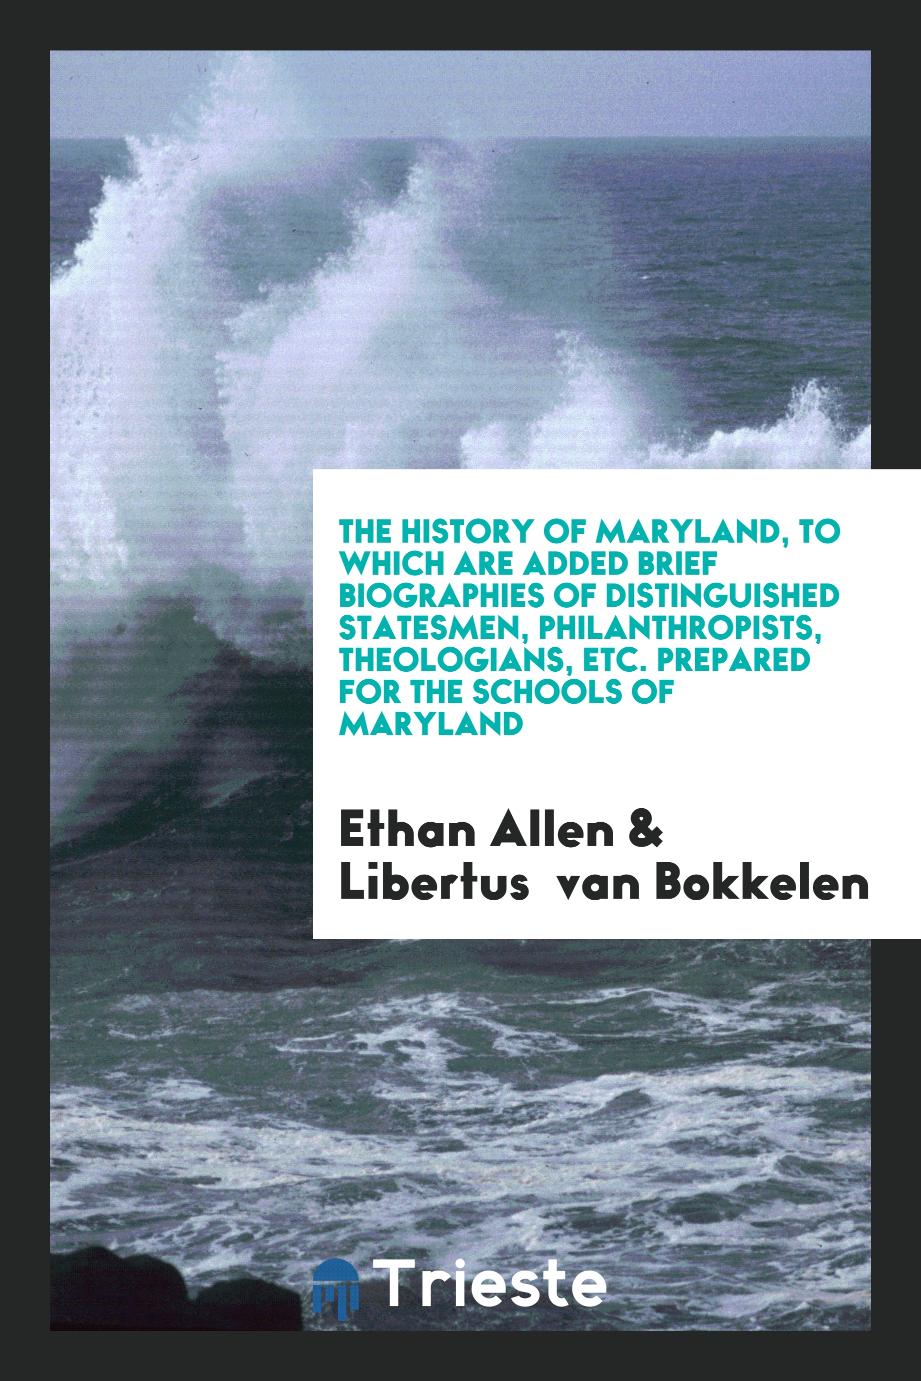 The History of Maryland, to Which Are Added Brief Biographies of Distinguished Statesmen, Philanthropists, Theologians, Etc. Prepared for the Schools of Maryland